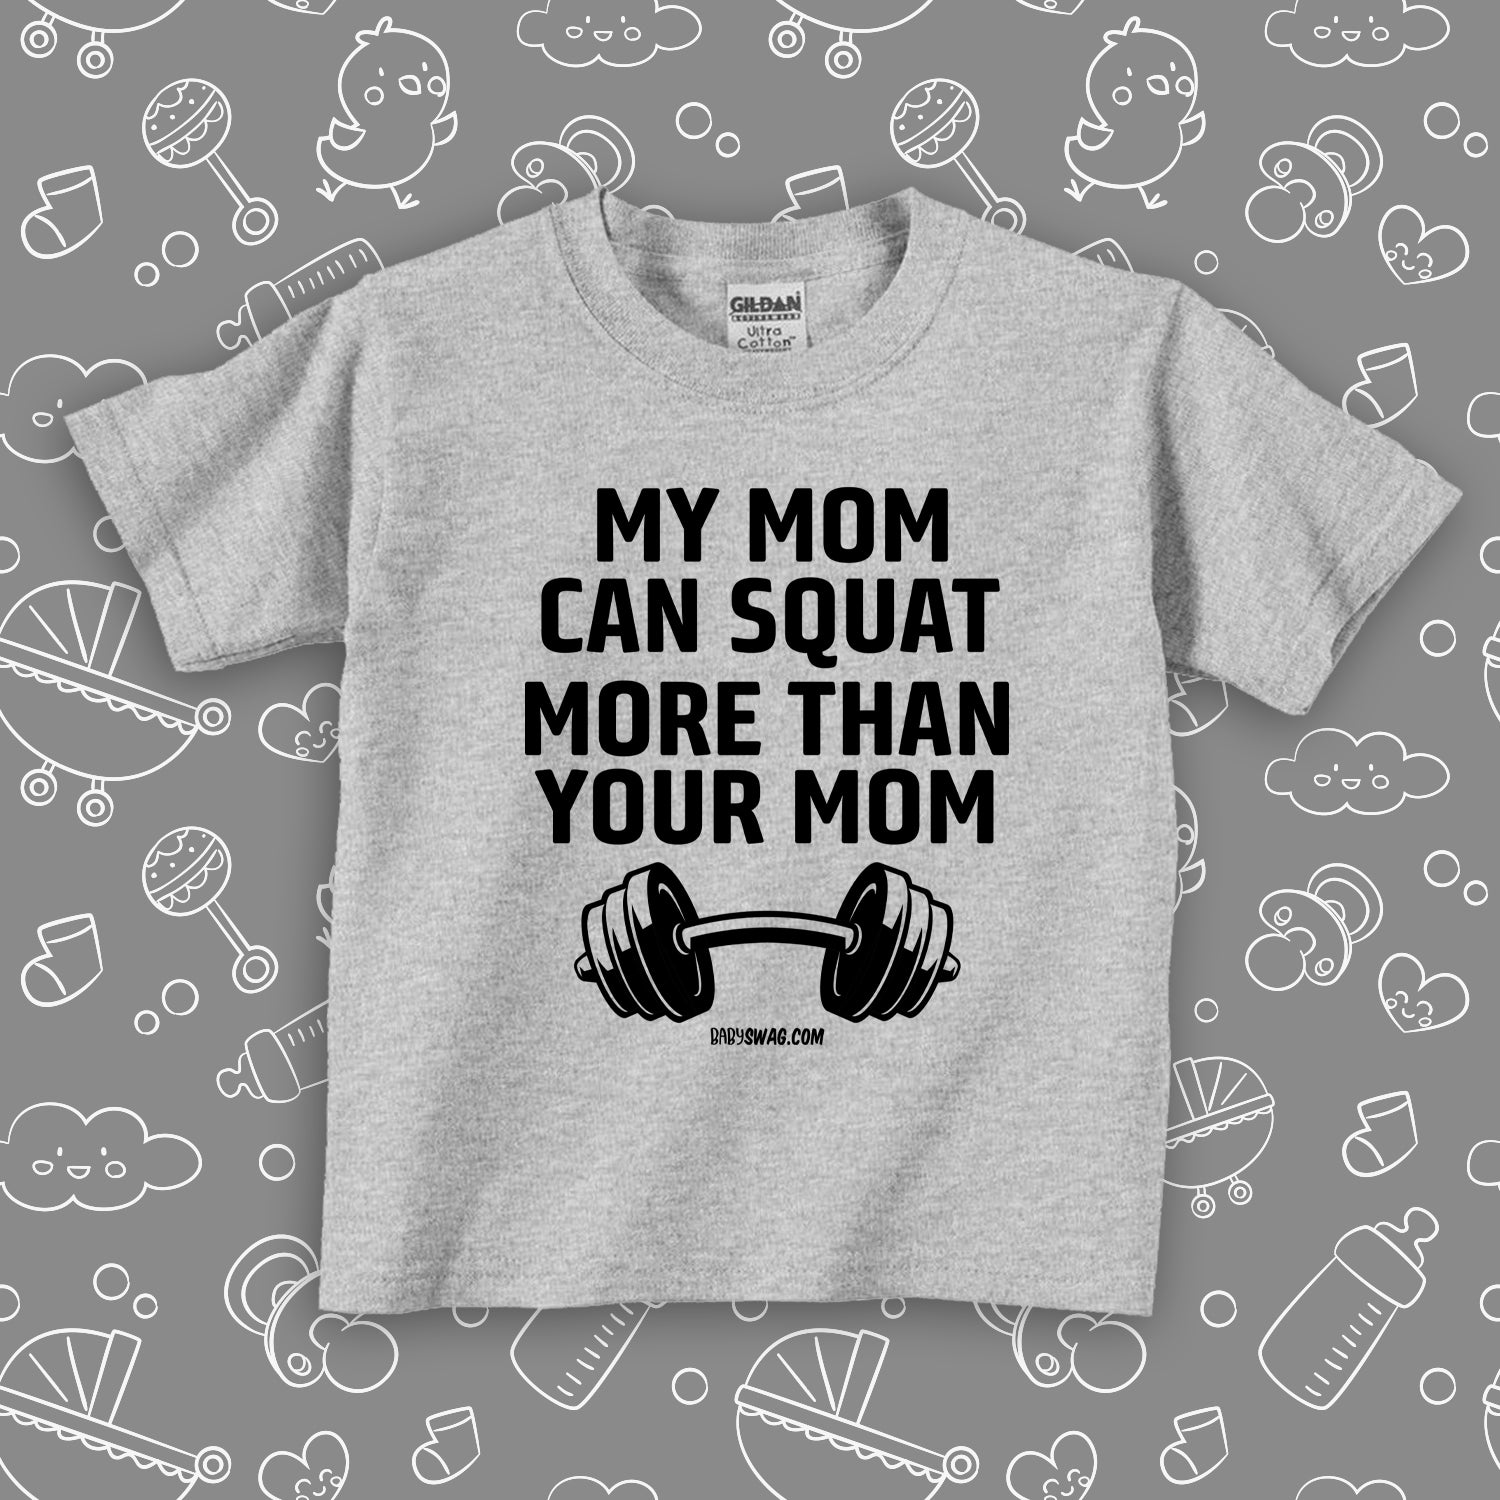 Toddler shirt with saying "My Mom Can Squat More Than Your Mom" in grey. 